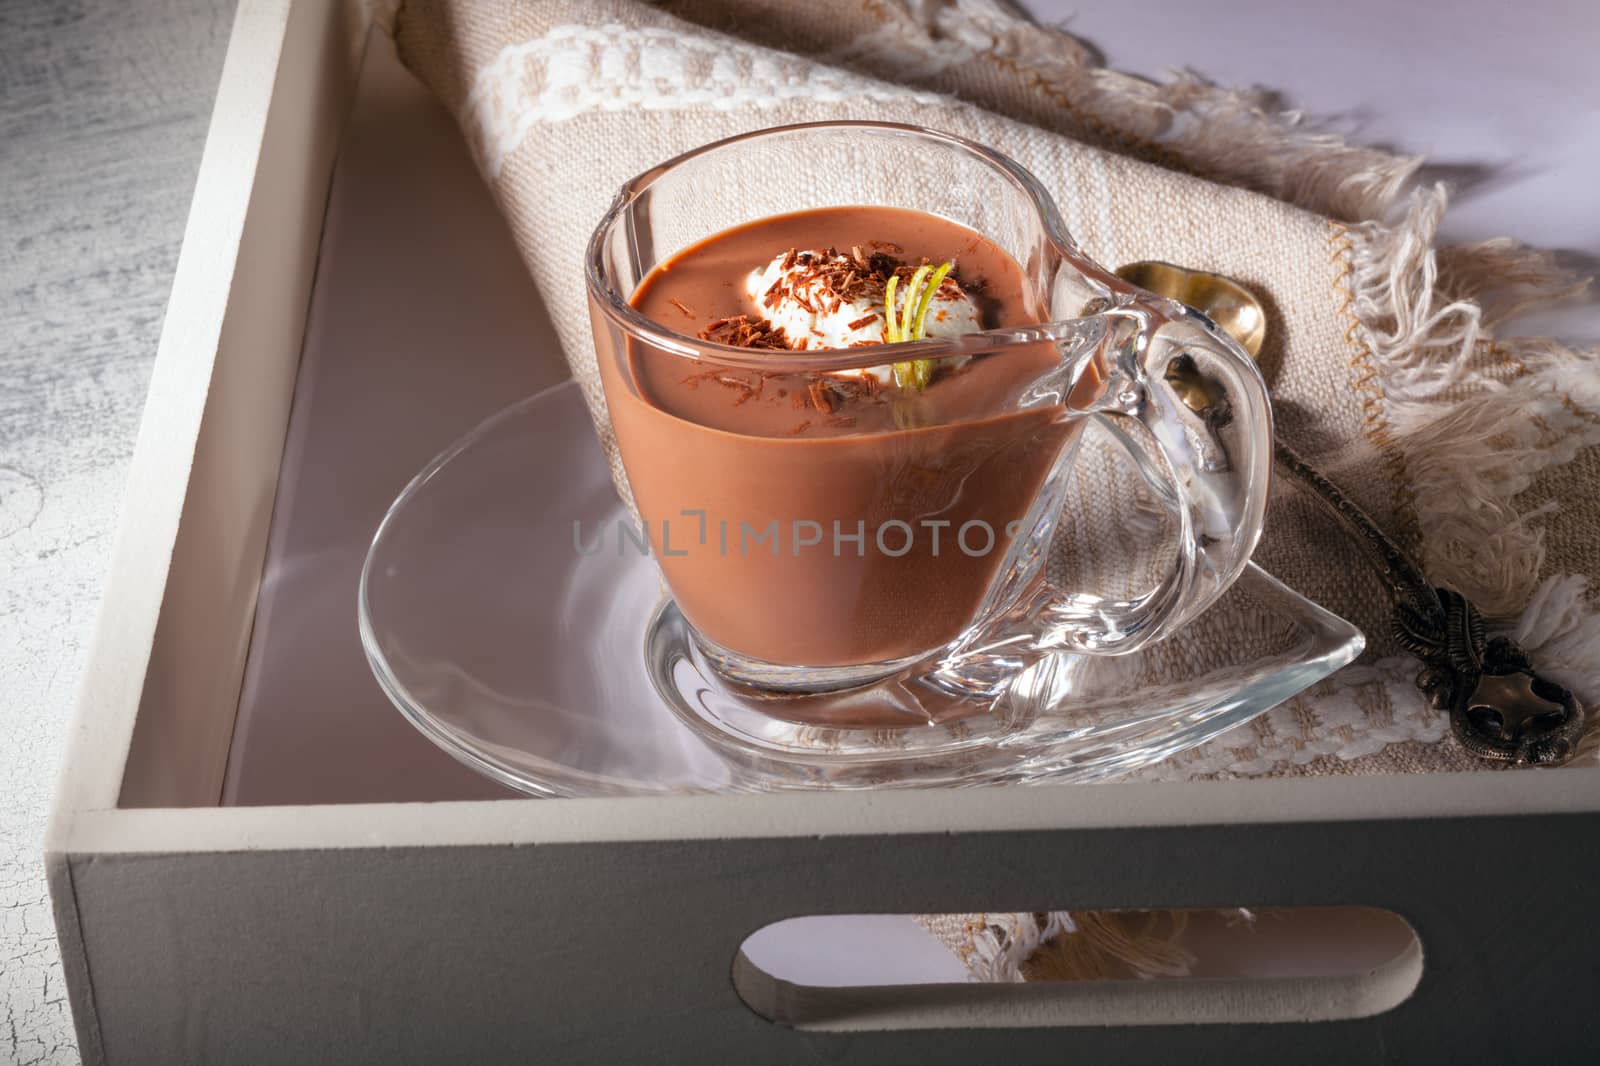 Chocolate Mousse Dessert with cream on a table